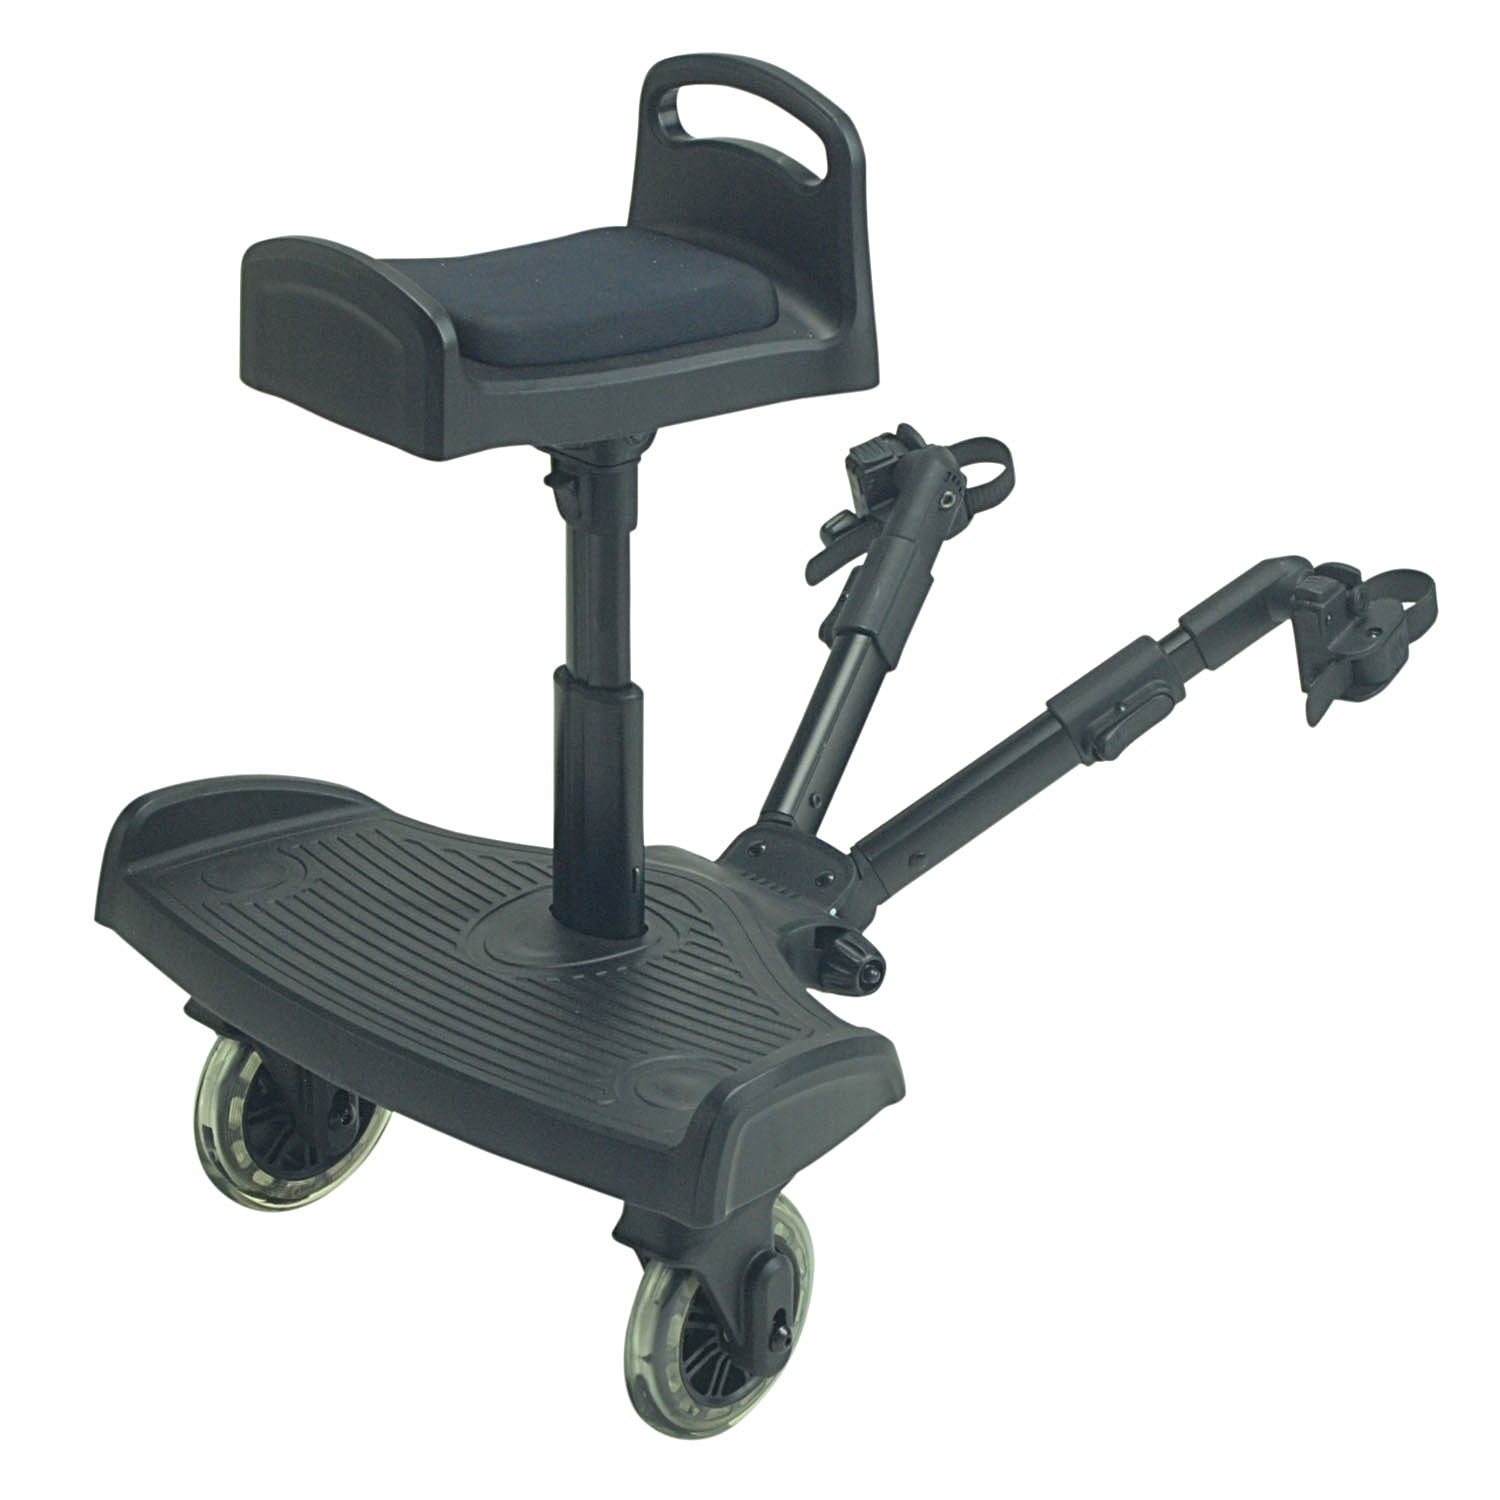 For-Your-Little-Ride On Board Compatible Travel Systems, Teutonia Mistral